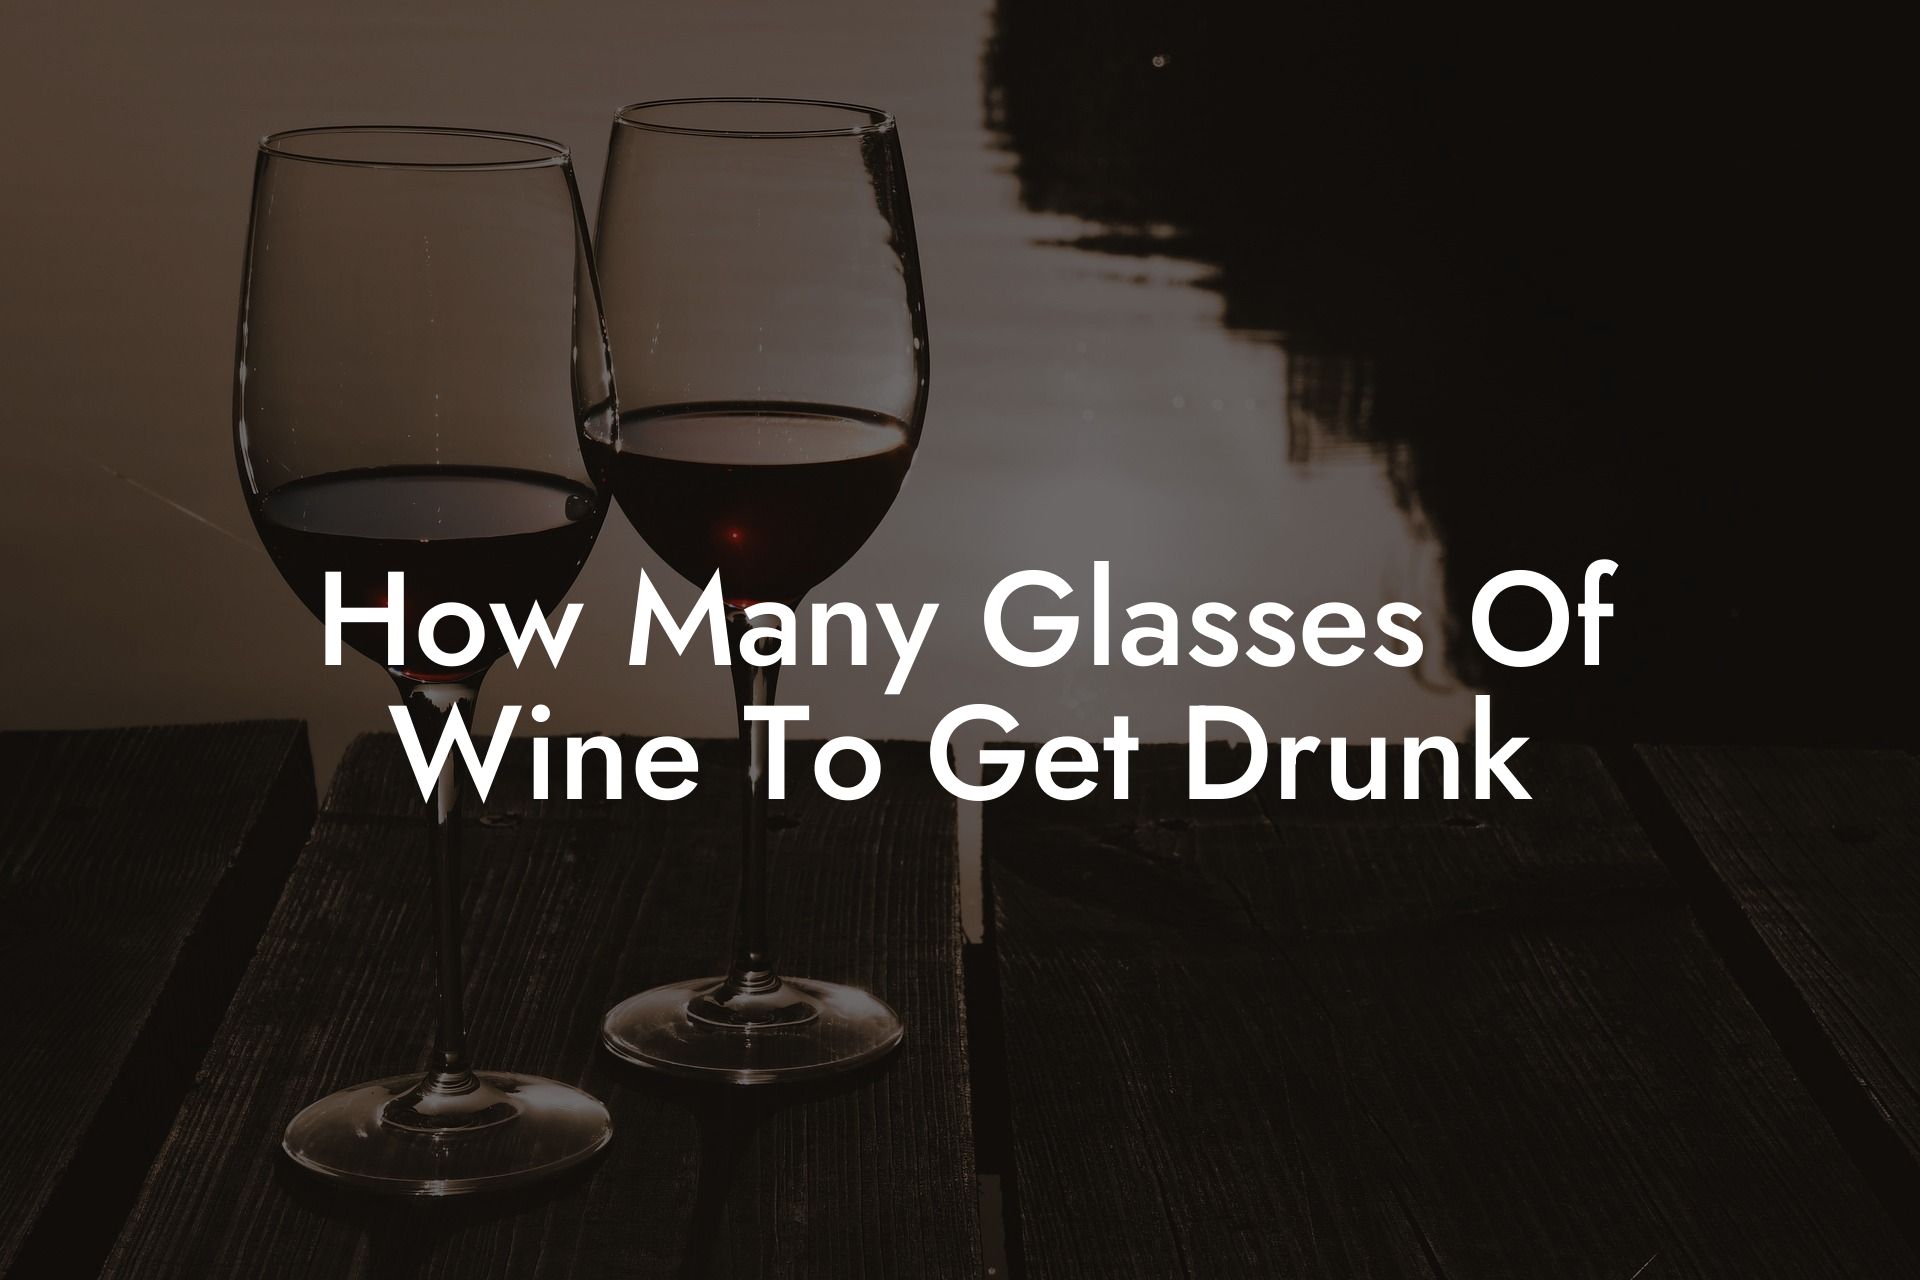 How Many Glasses Of Wine To Get Drunk